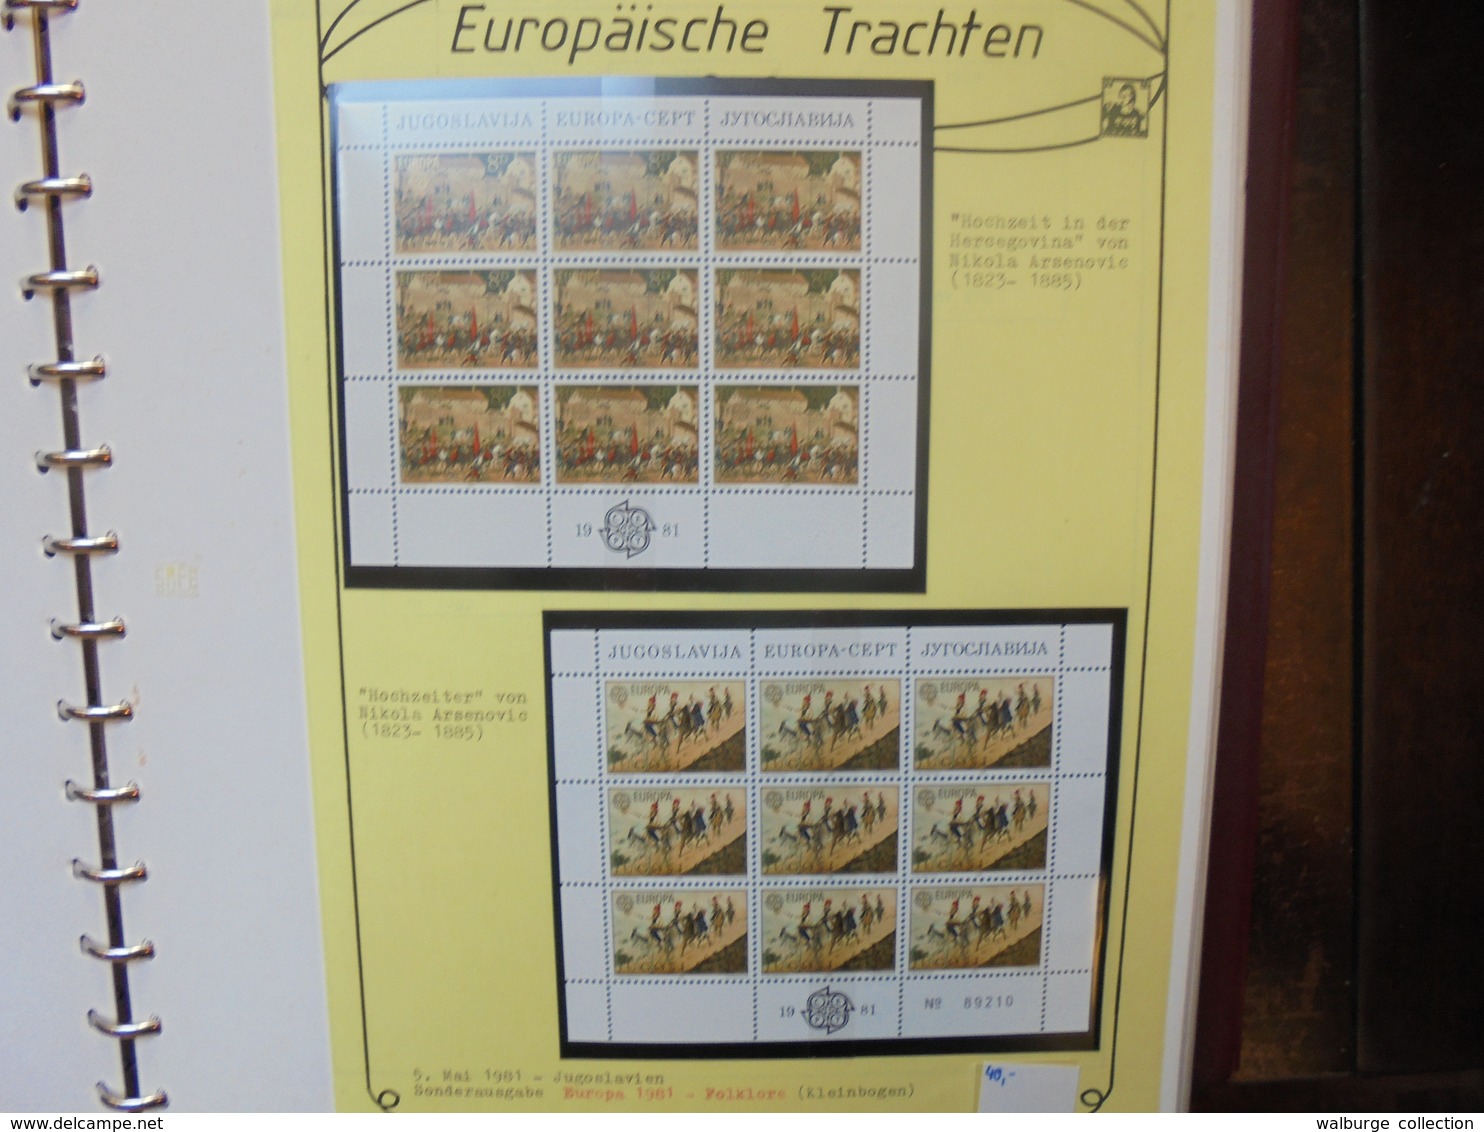 EUROPE-BLOCS-TIMBRES-FDC-COURRIERS (2463) 2 KILOS 800 - Unclassified